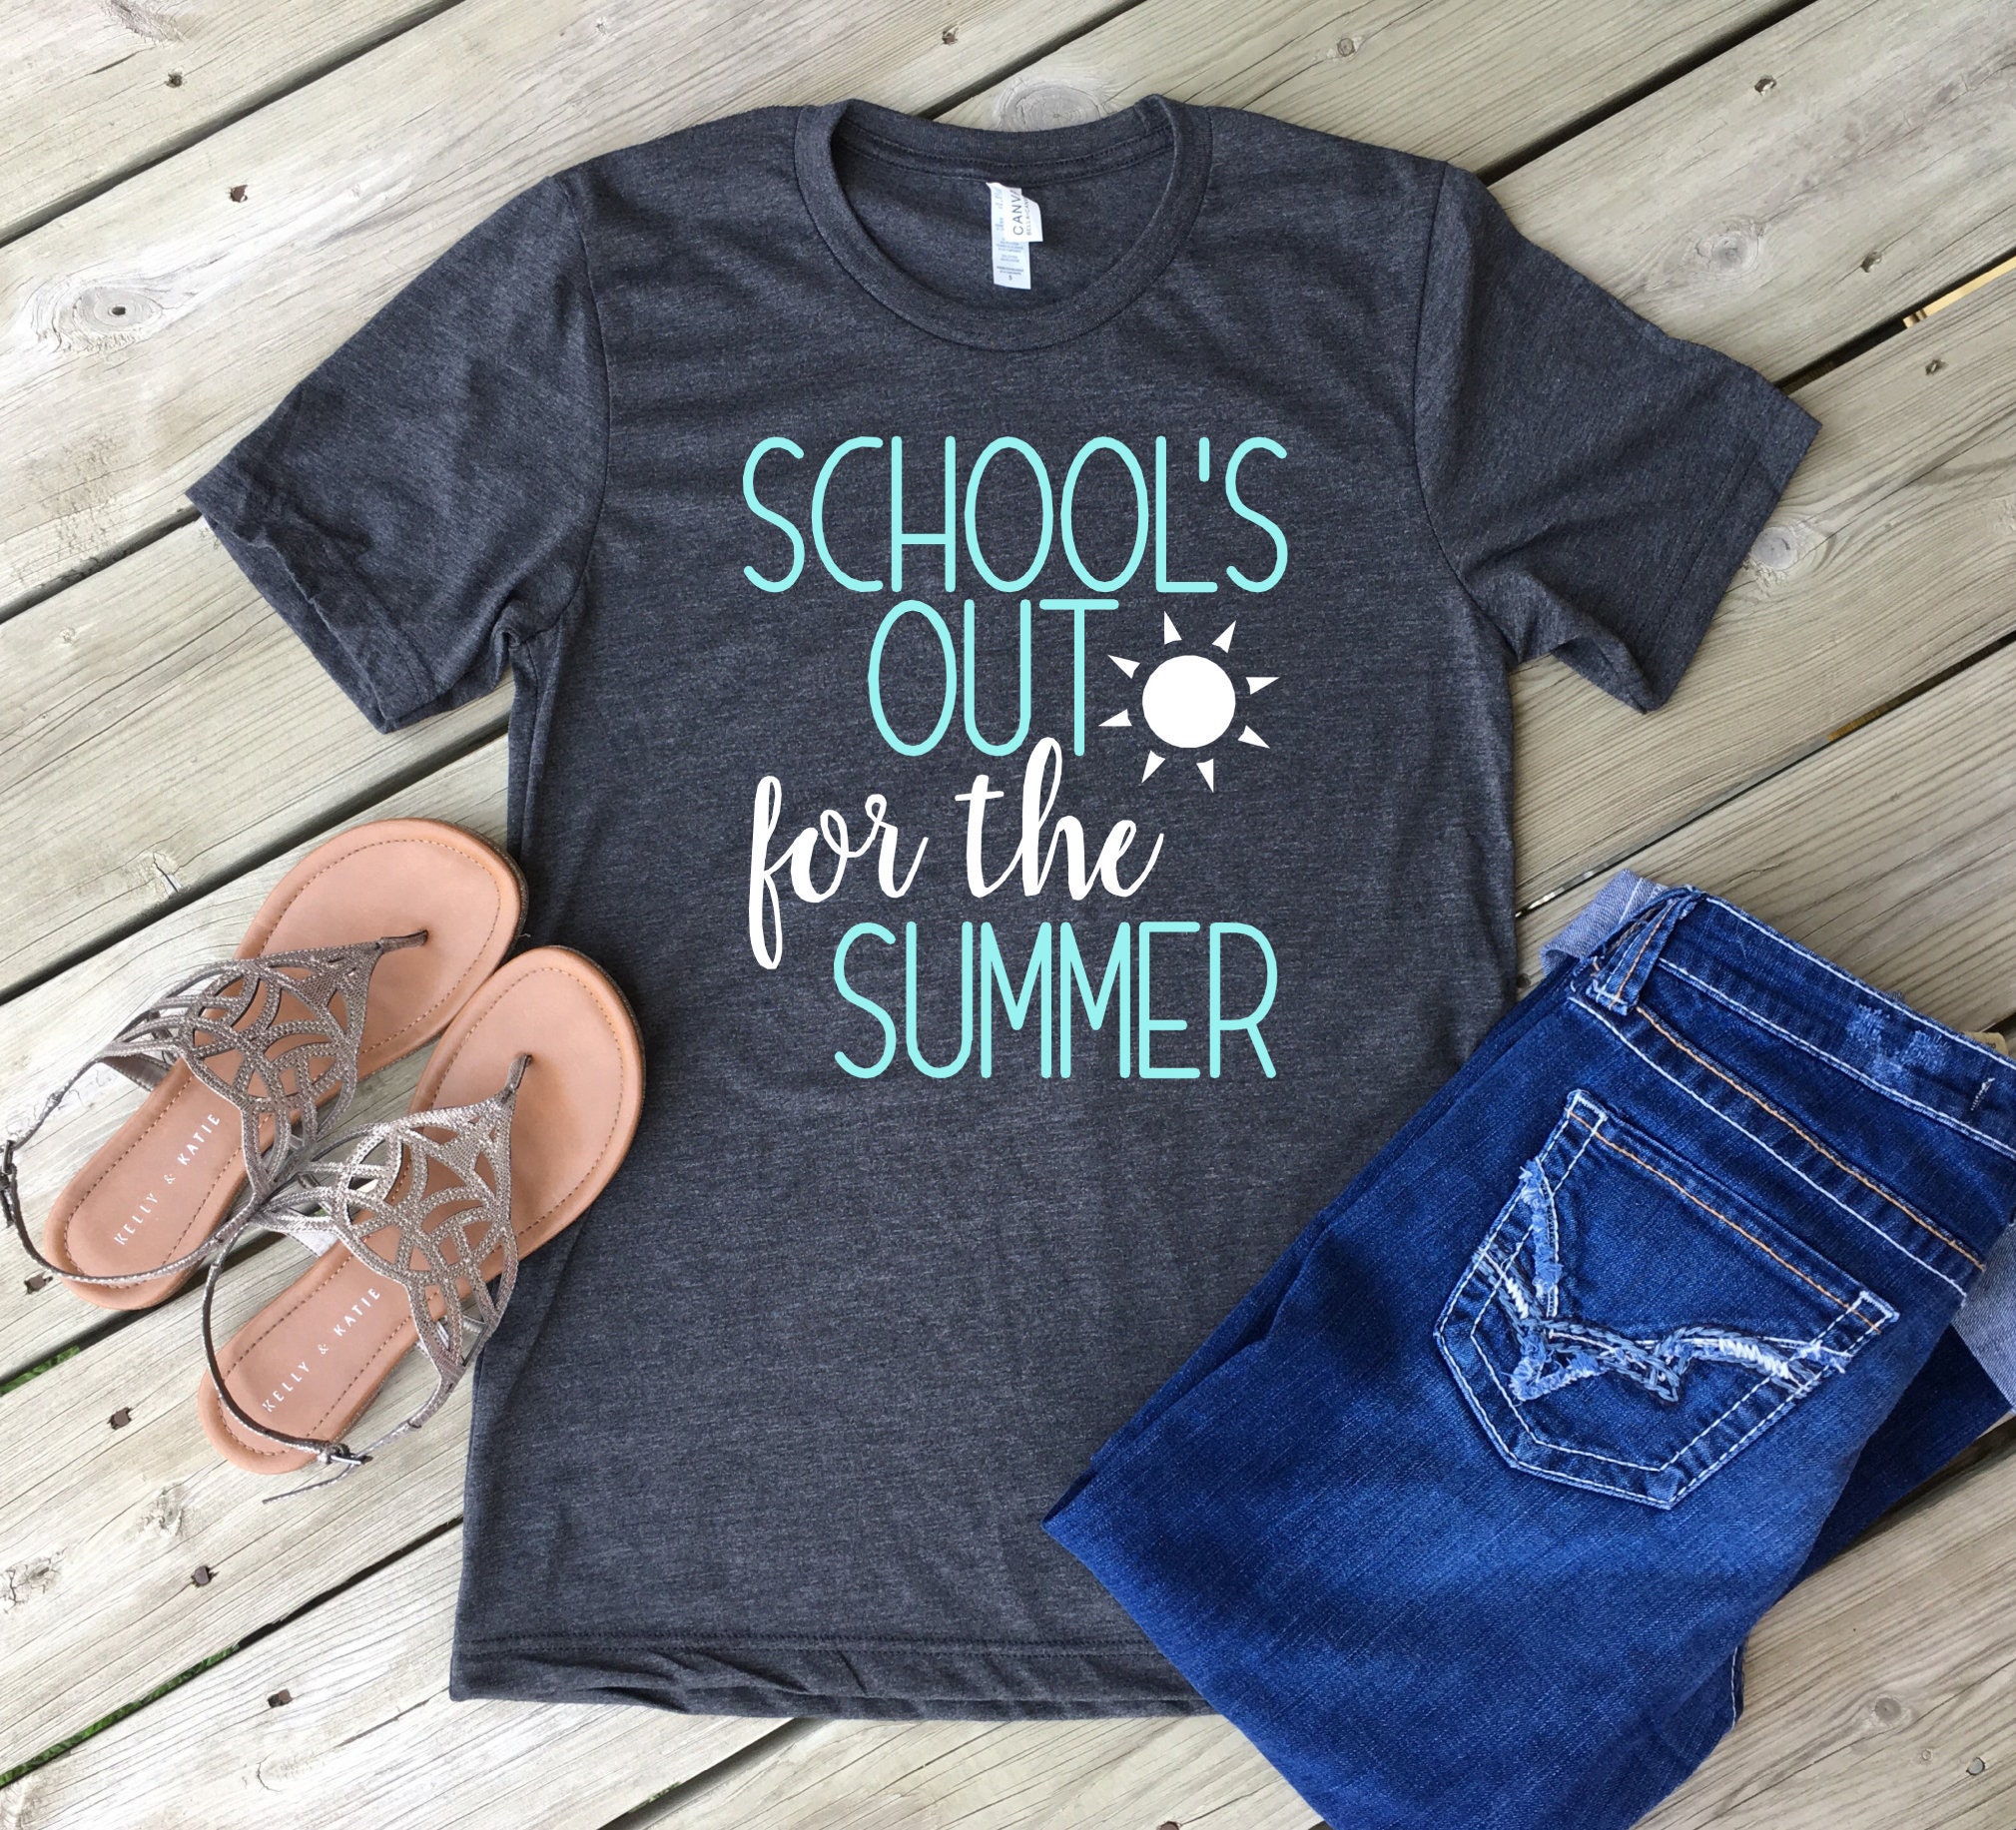 School's Out for the Summer Shirt/ Unisex Size/ Teacher | Etsy